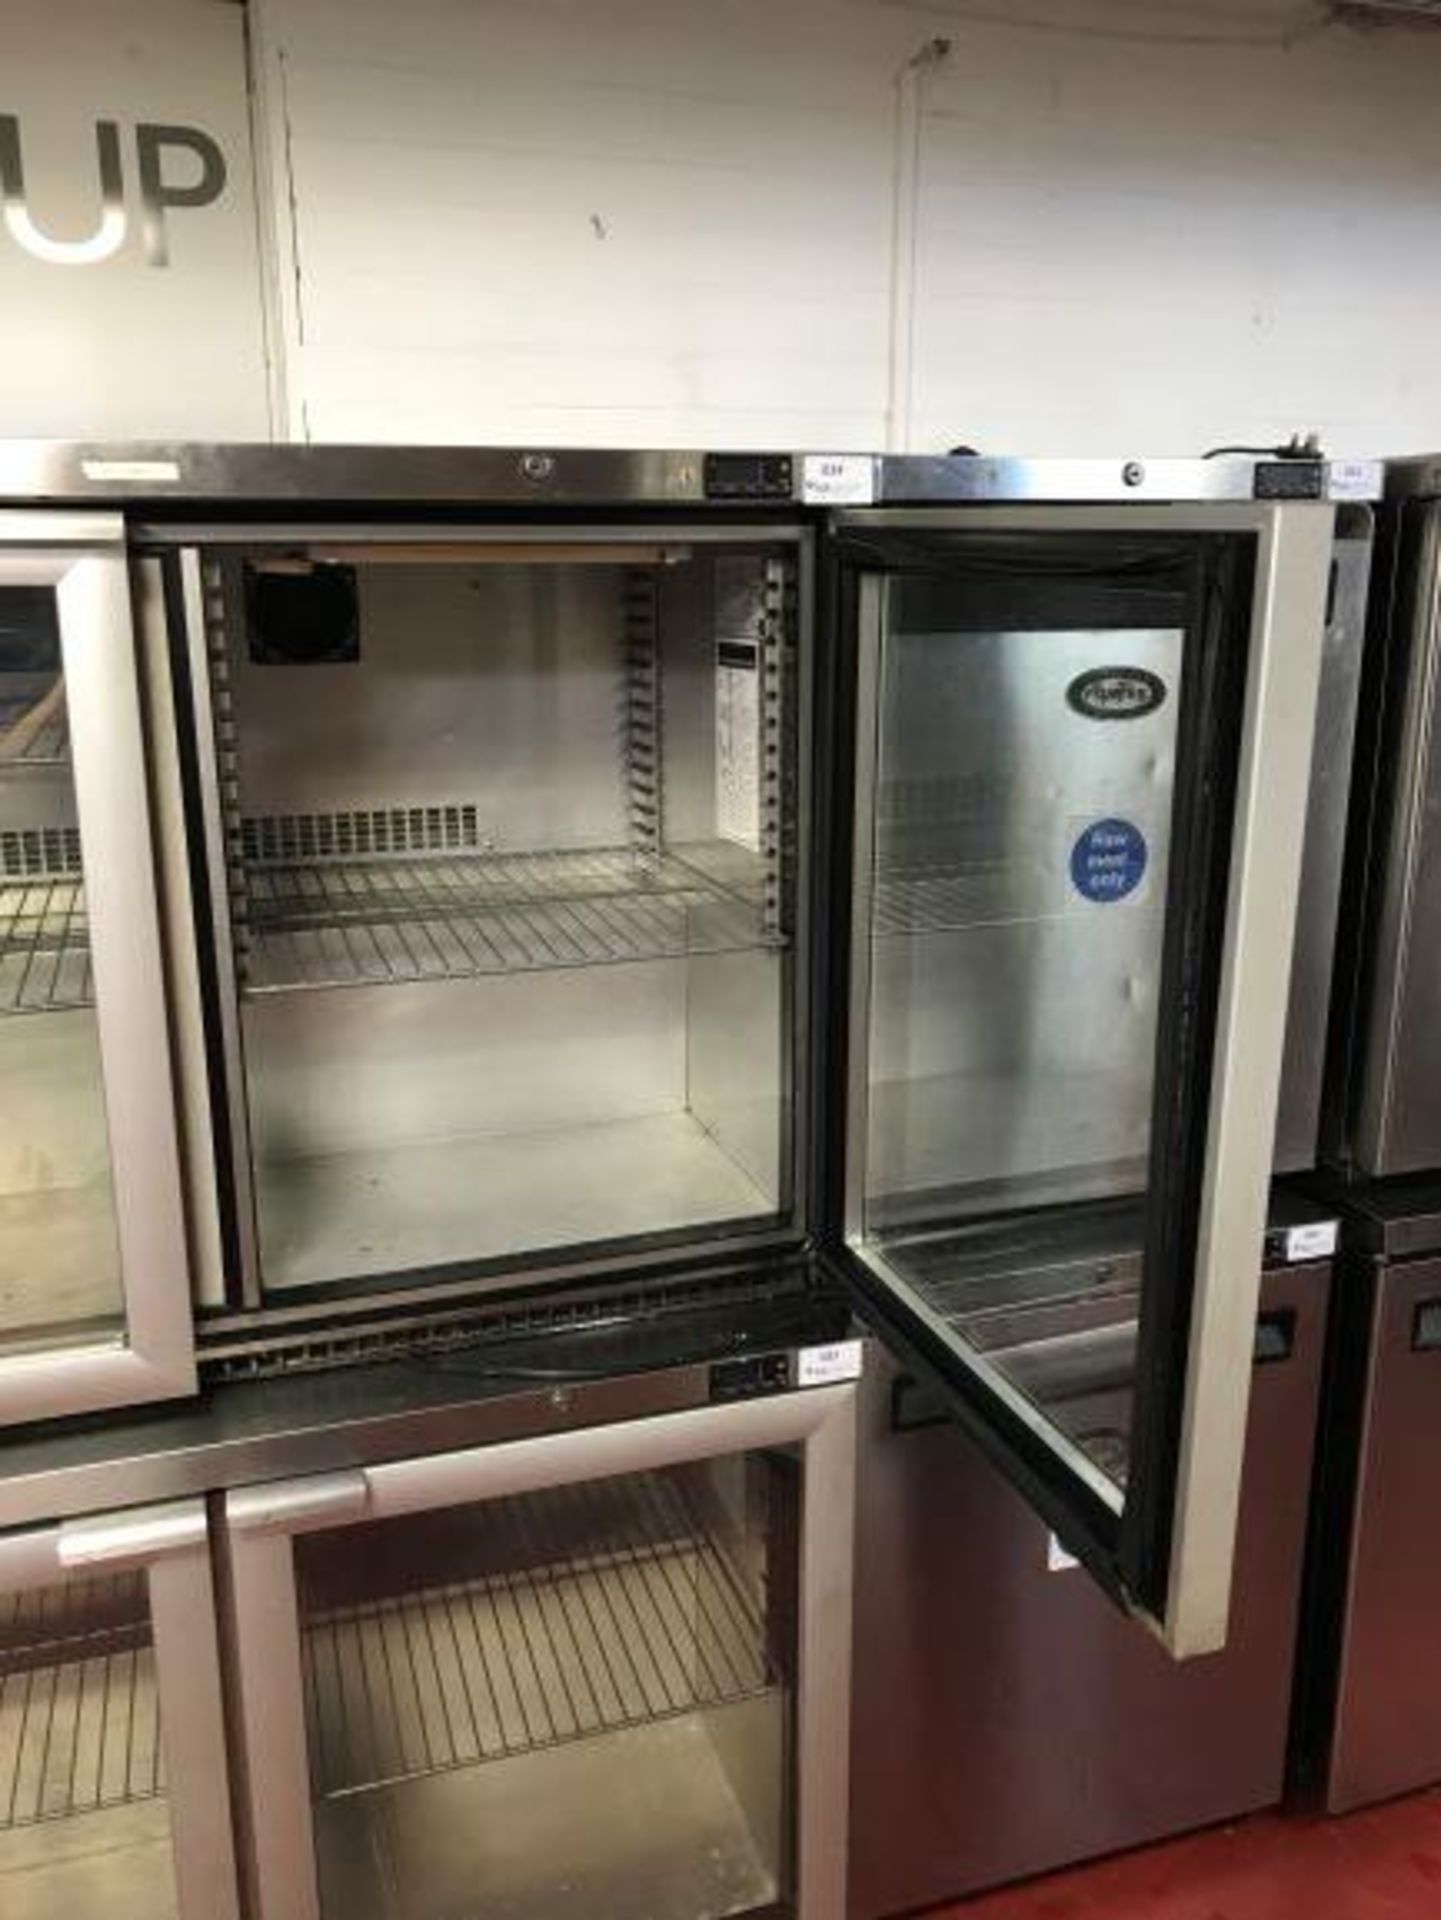 Foster Refrigeration HR360 stainless steel two door under counter refrigerator - Image 2 of 5